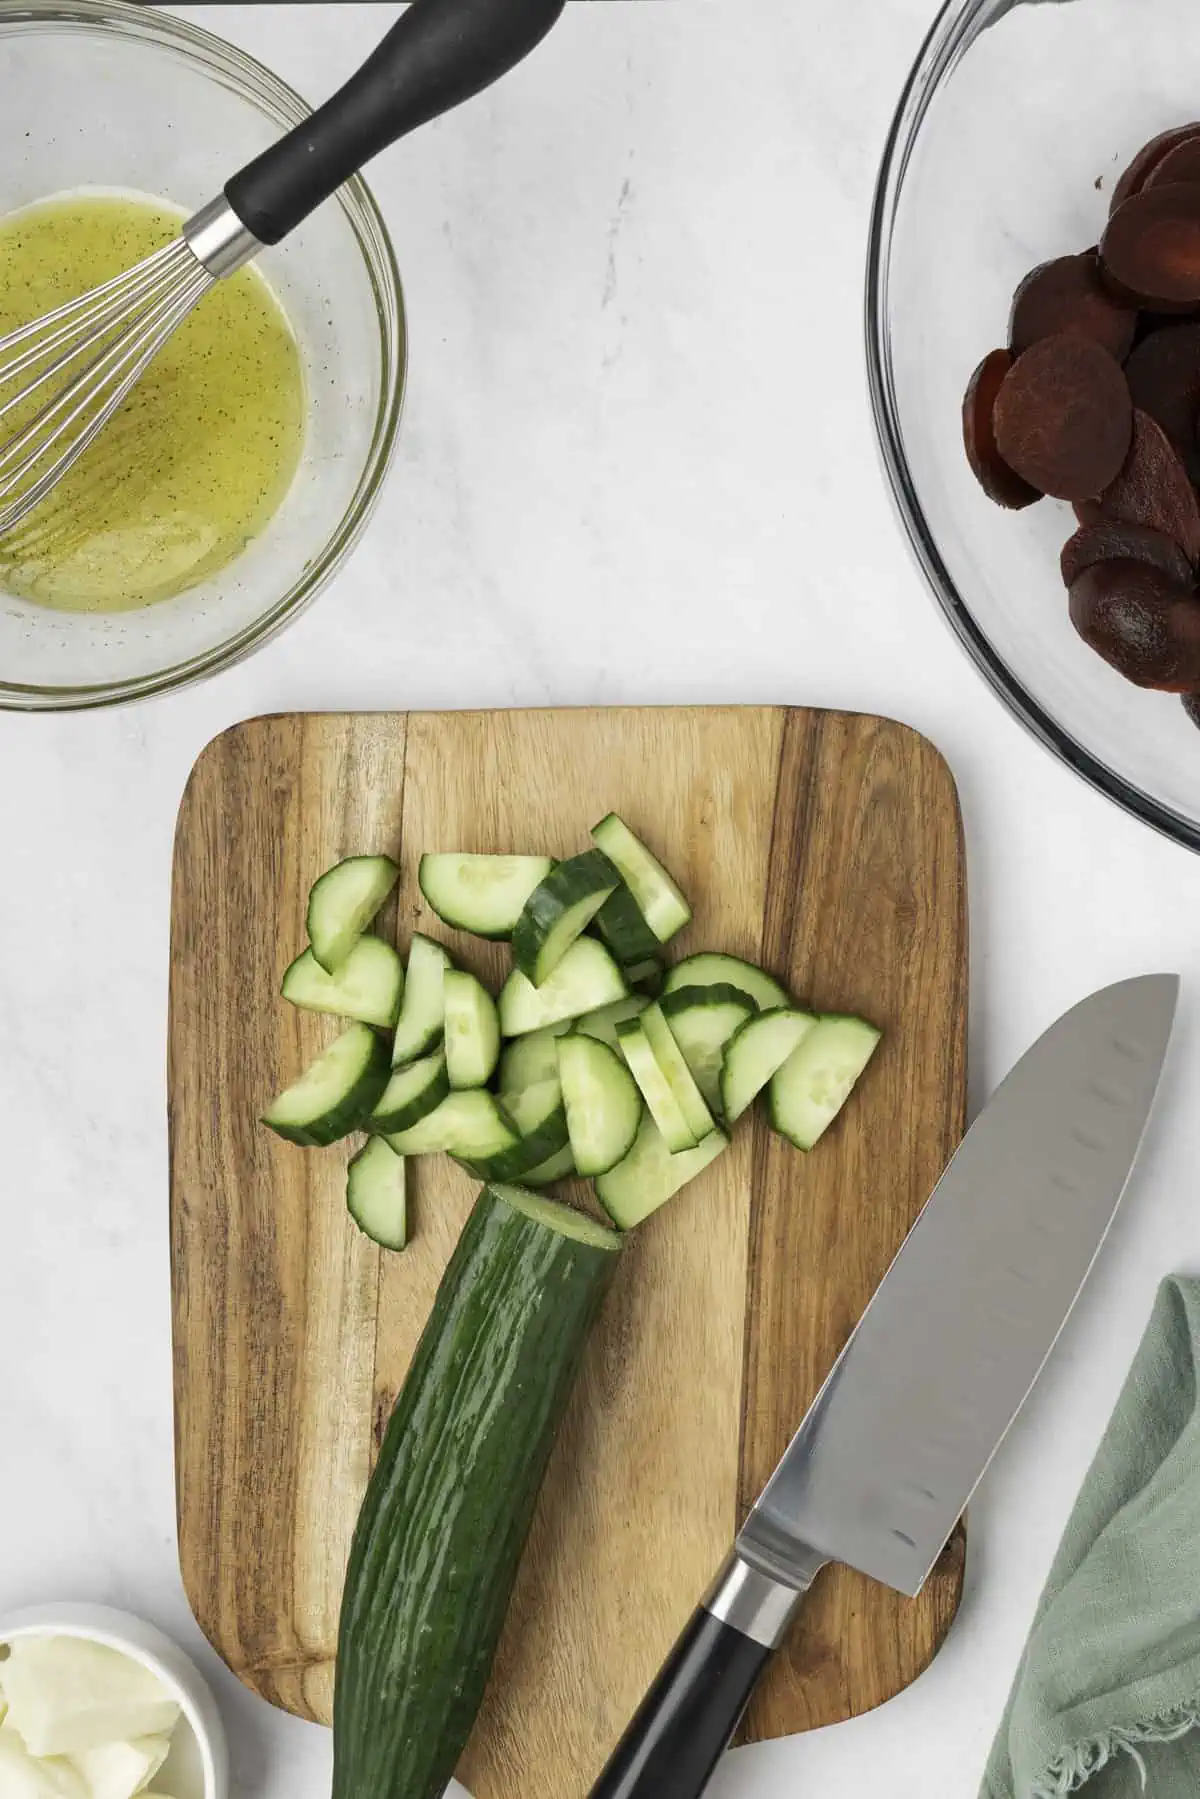 The cucumber sliced on a cutting board. 